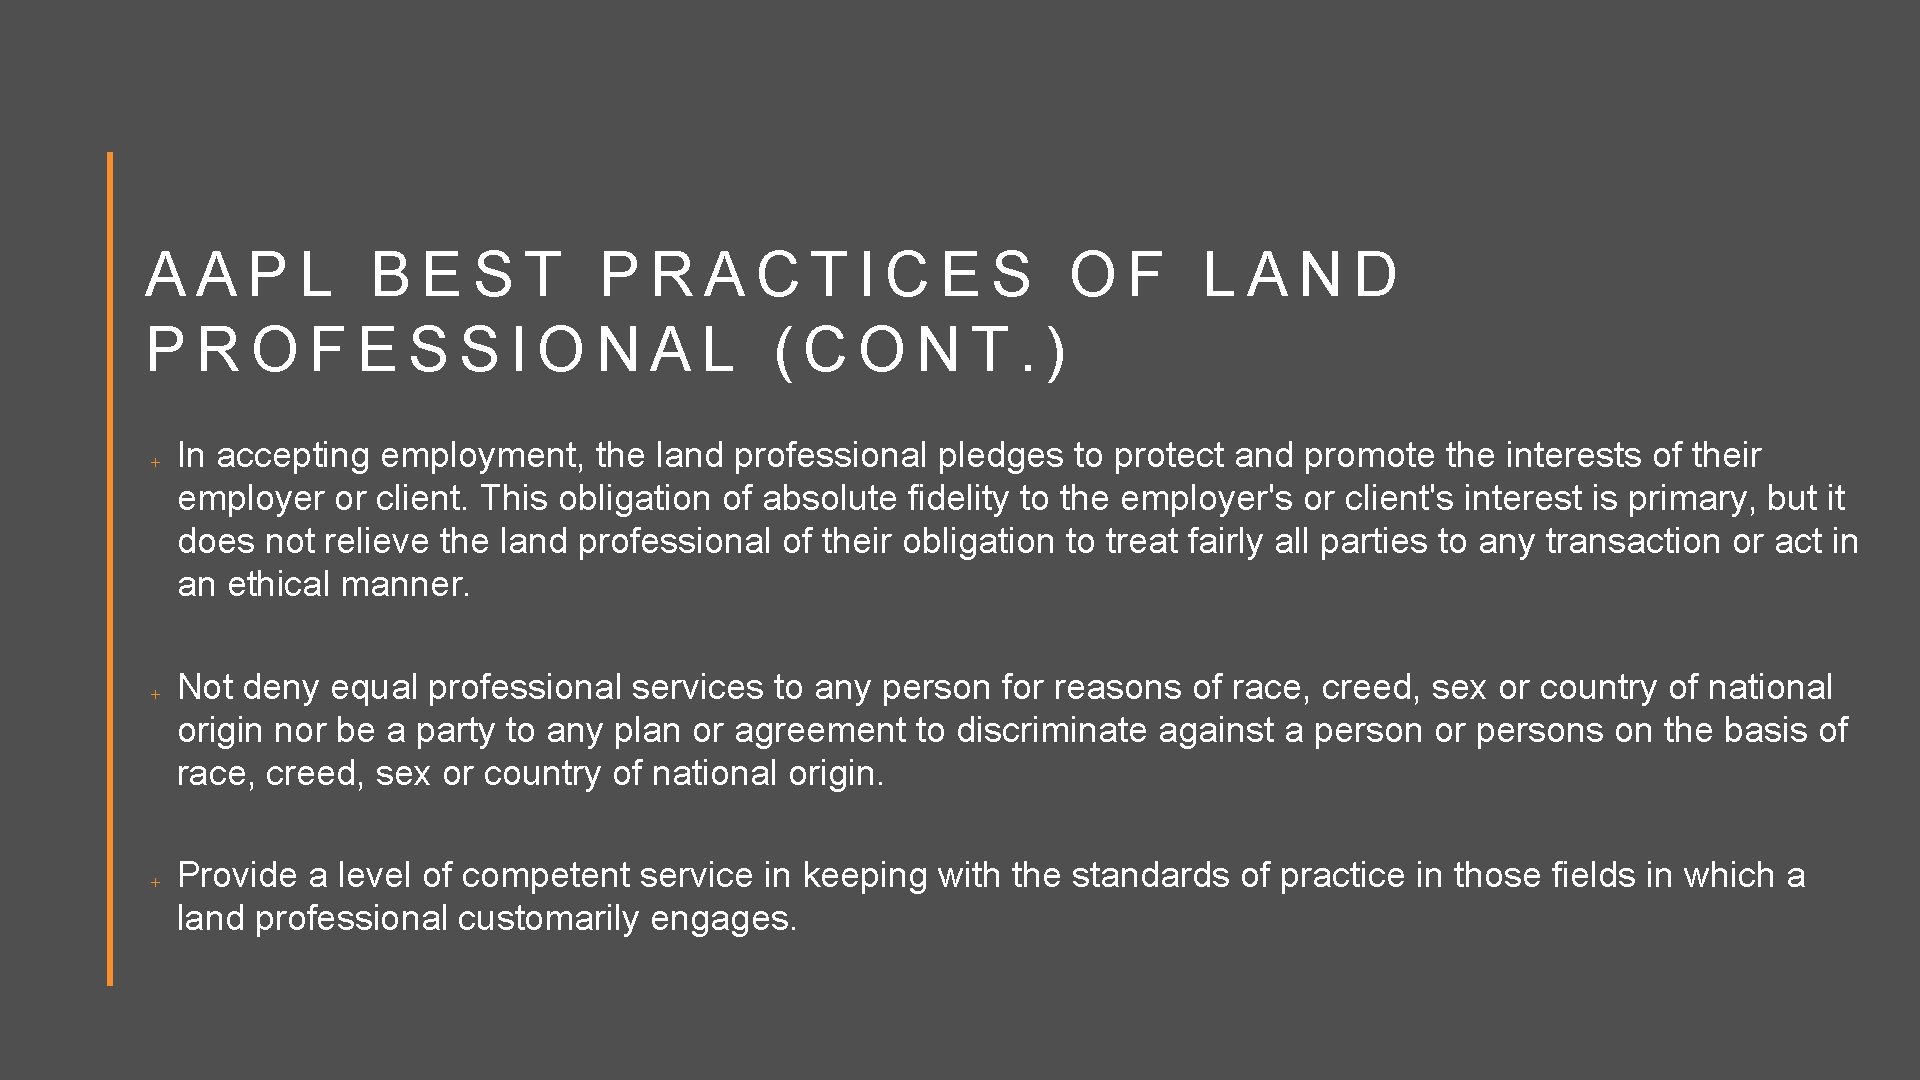 AAPL BEST PRACTICES OF LAND PROFESSIONAL (CONT. ) In accepting employment, the land professional